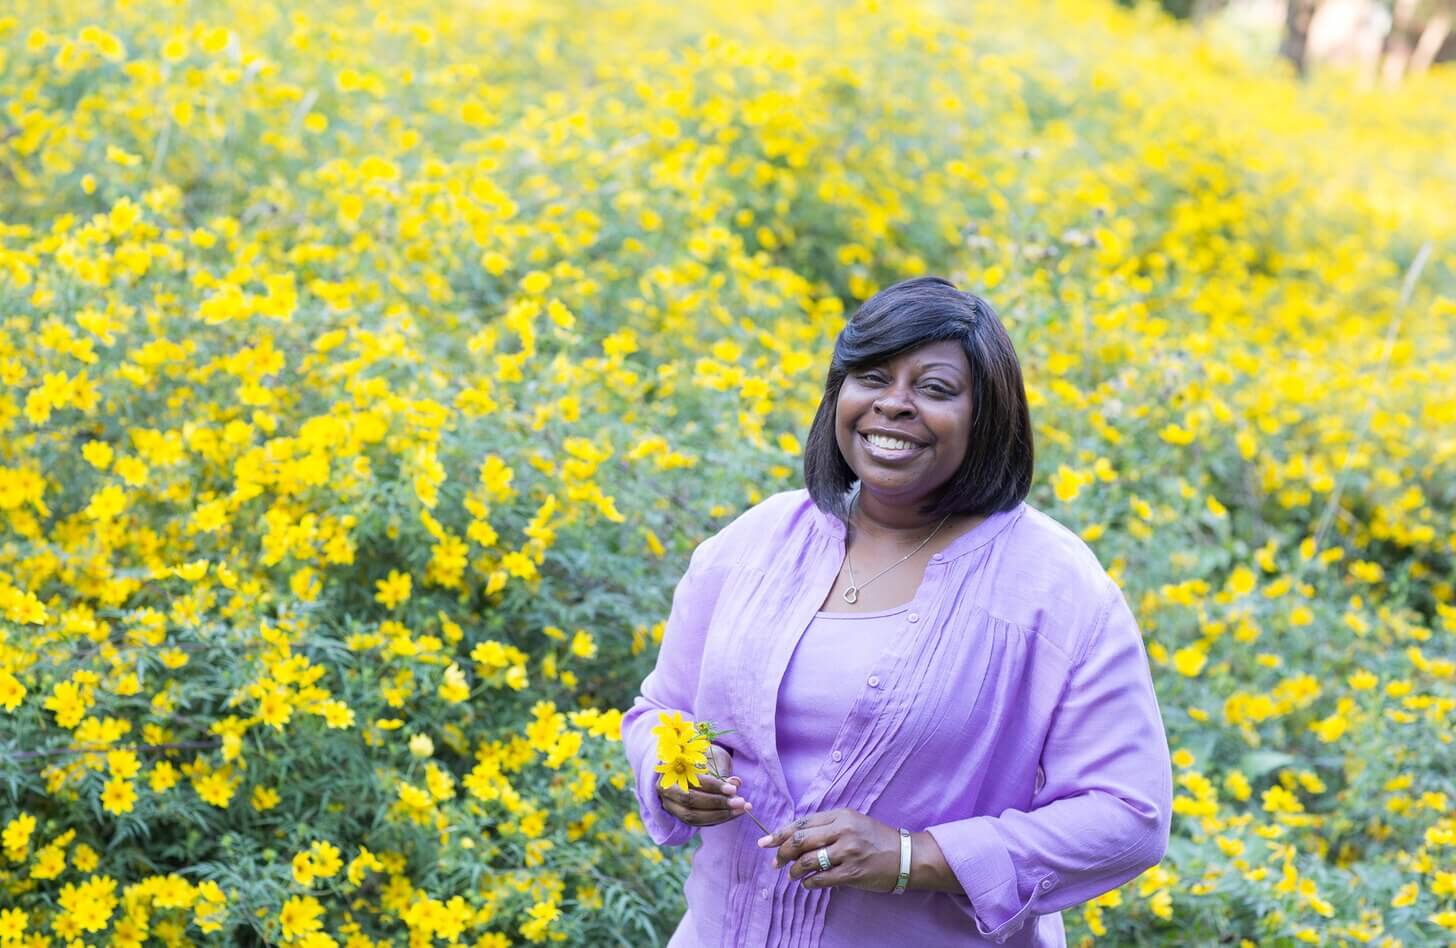 Nikki stands in a field of yellow flowers